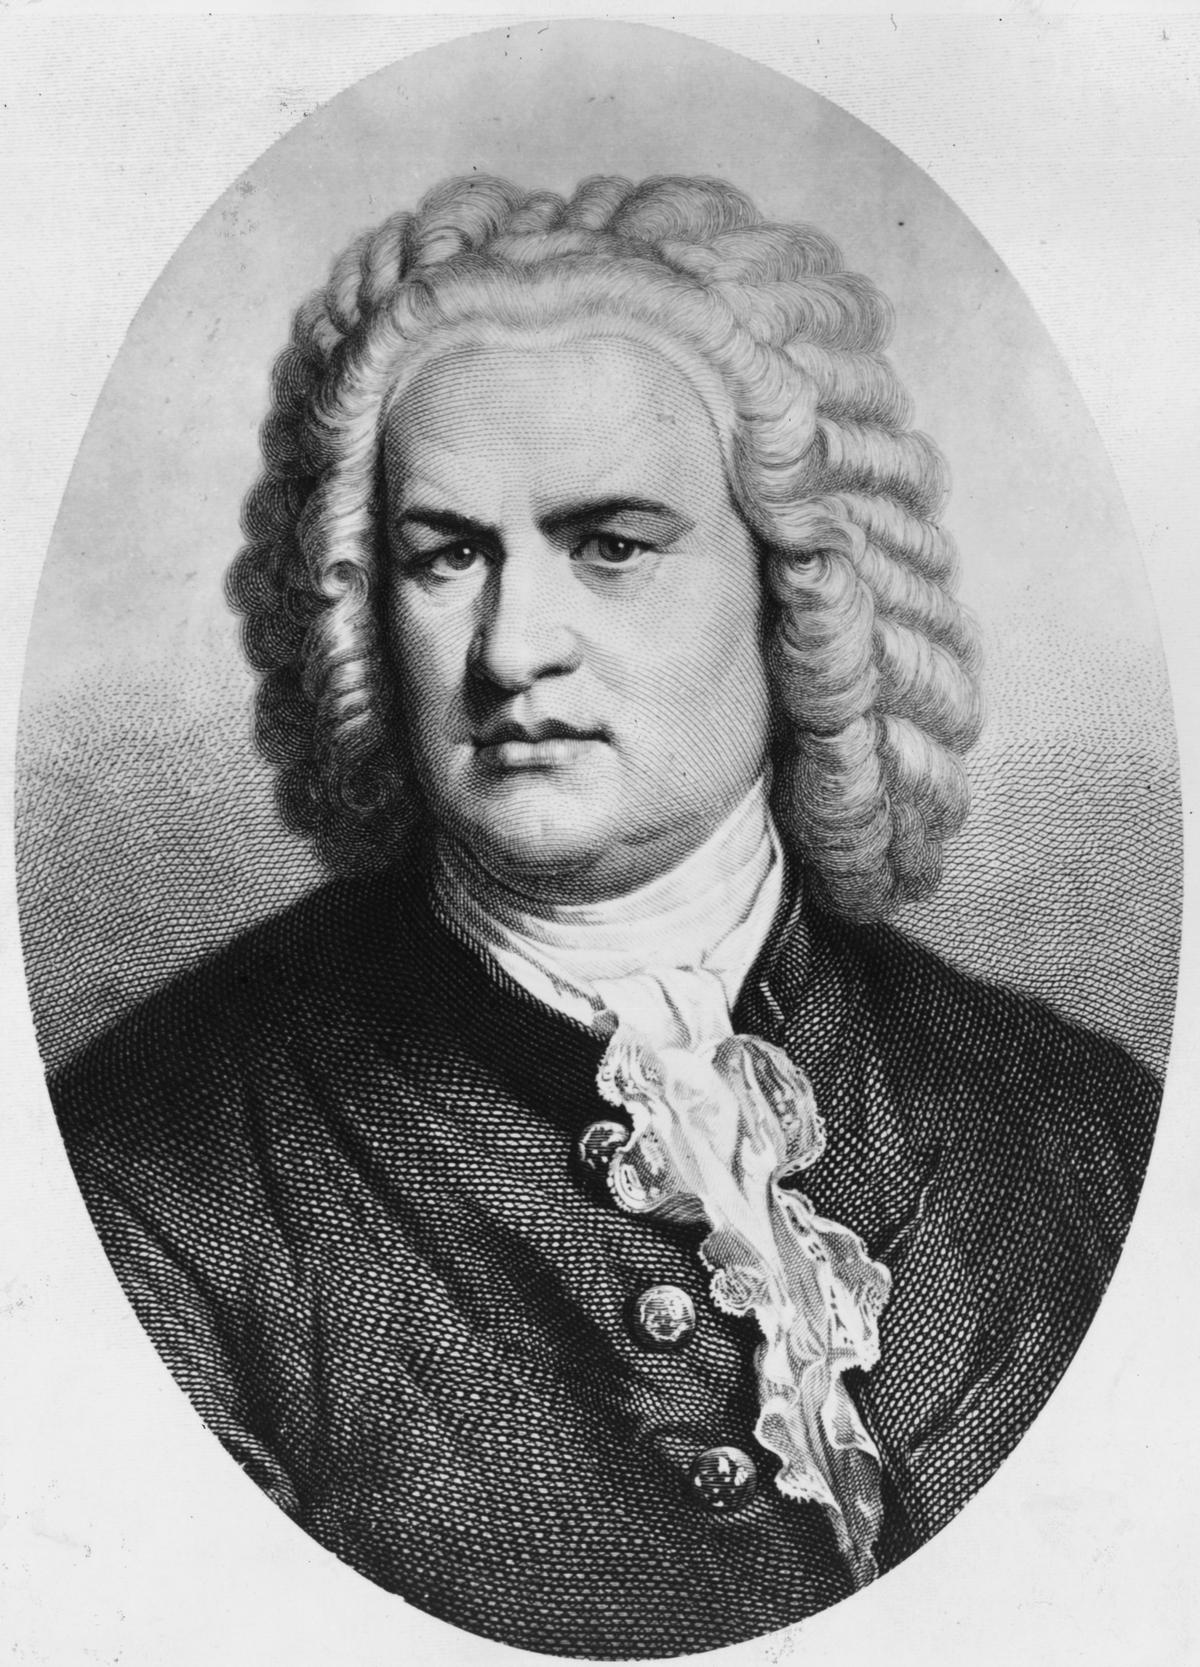 Circa 1722, German organist and Barouque composer, Johann Sebastian Bach (1685-1750). (Photo by Hulton Archive/Getty Images)